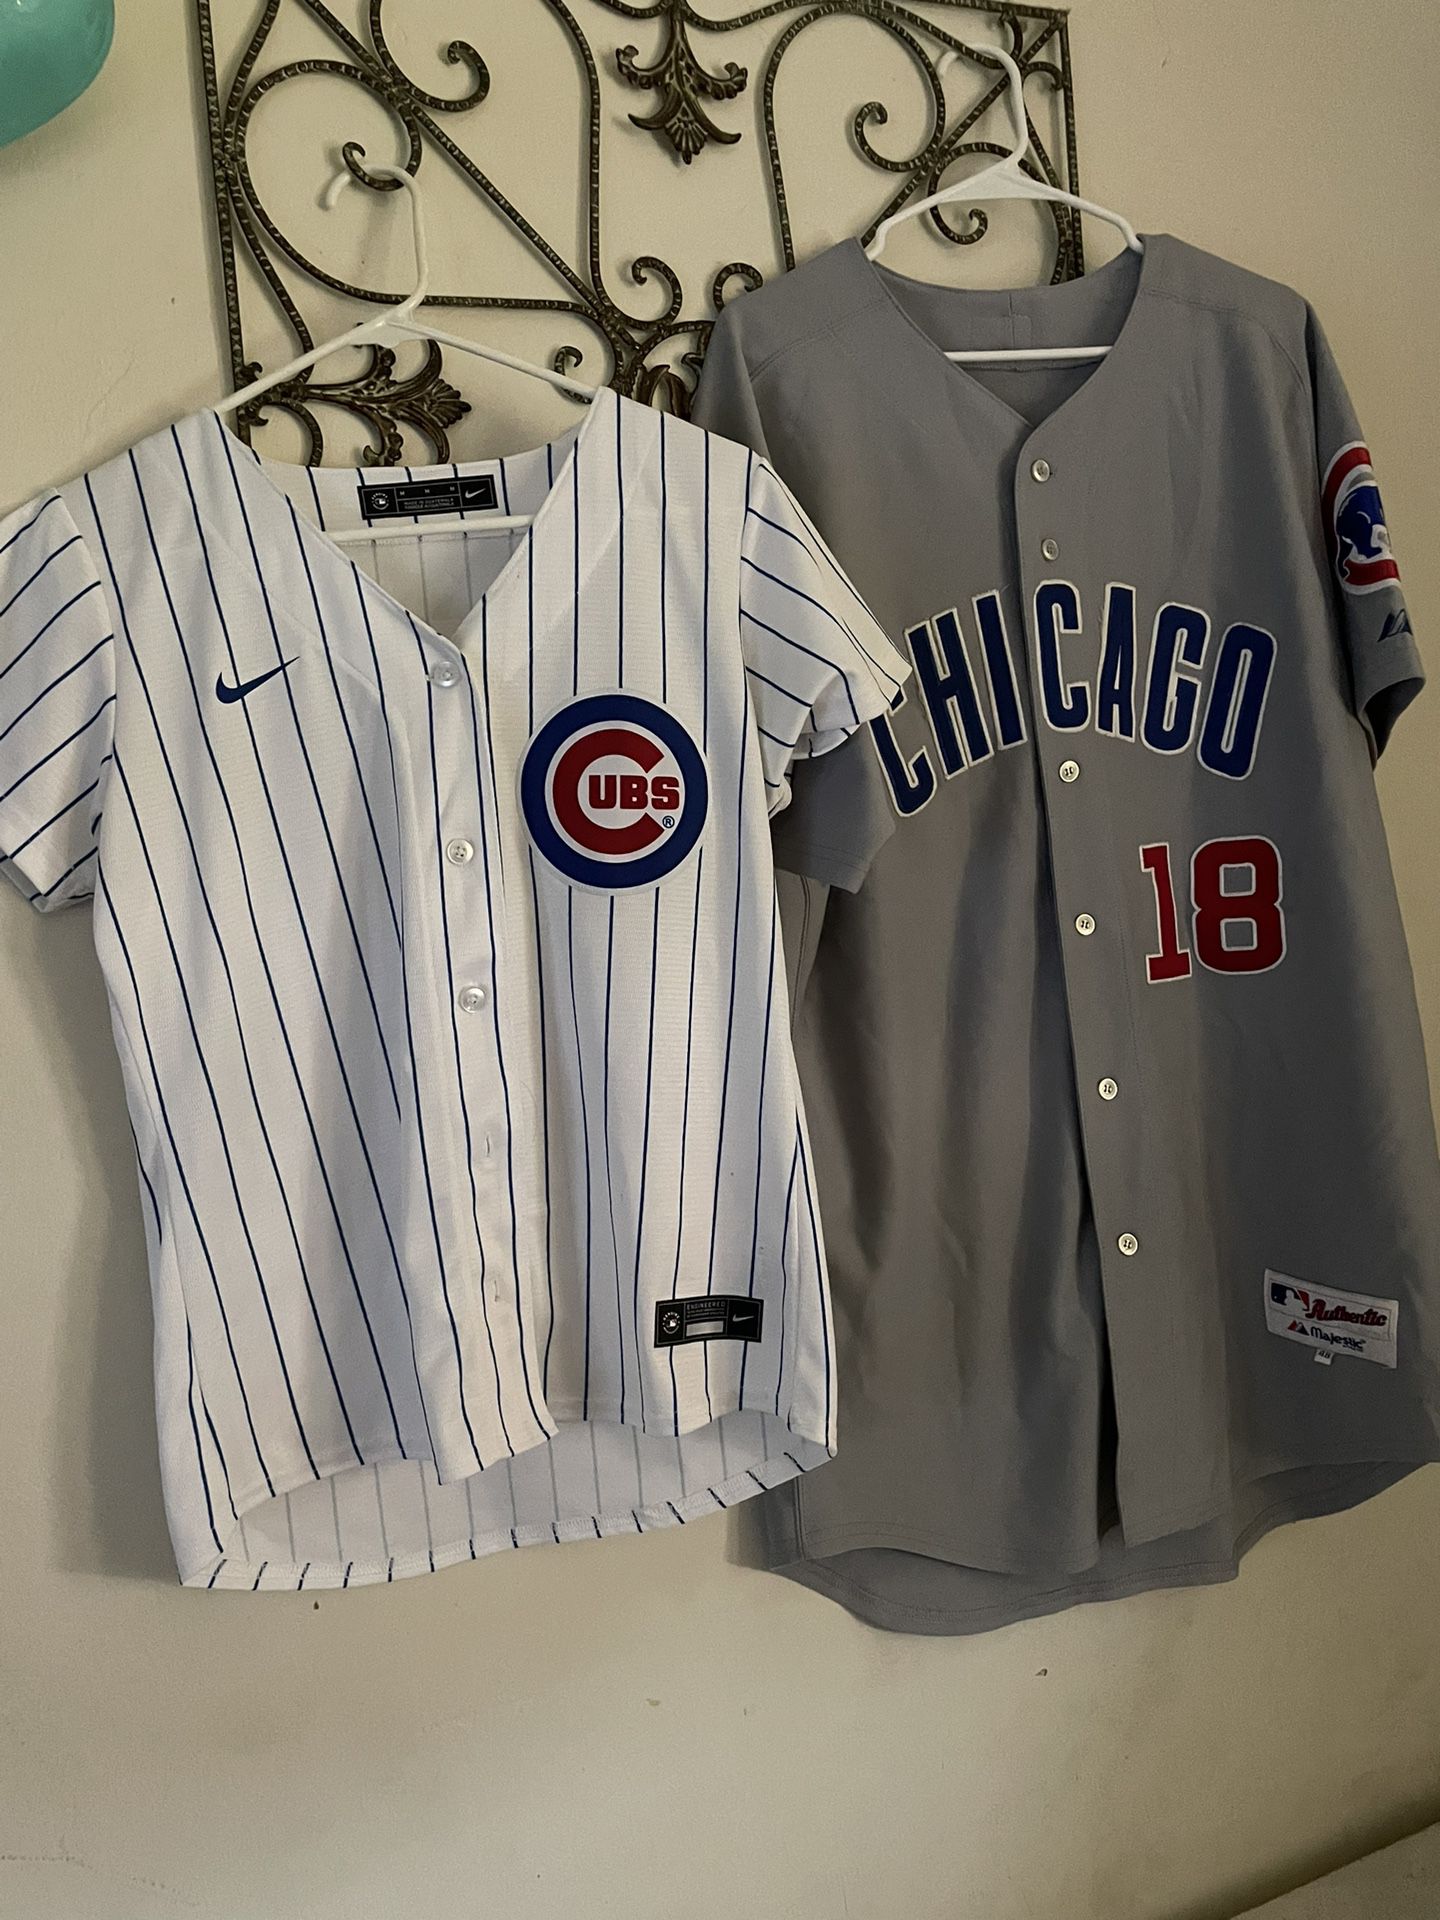 His & Her Cubs jerseys (Authentic)